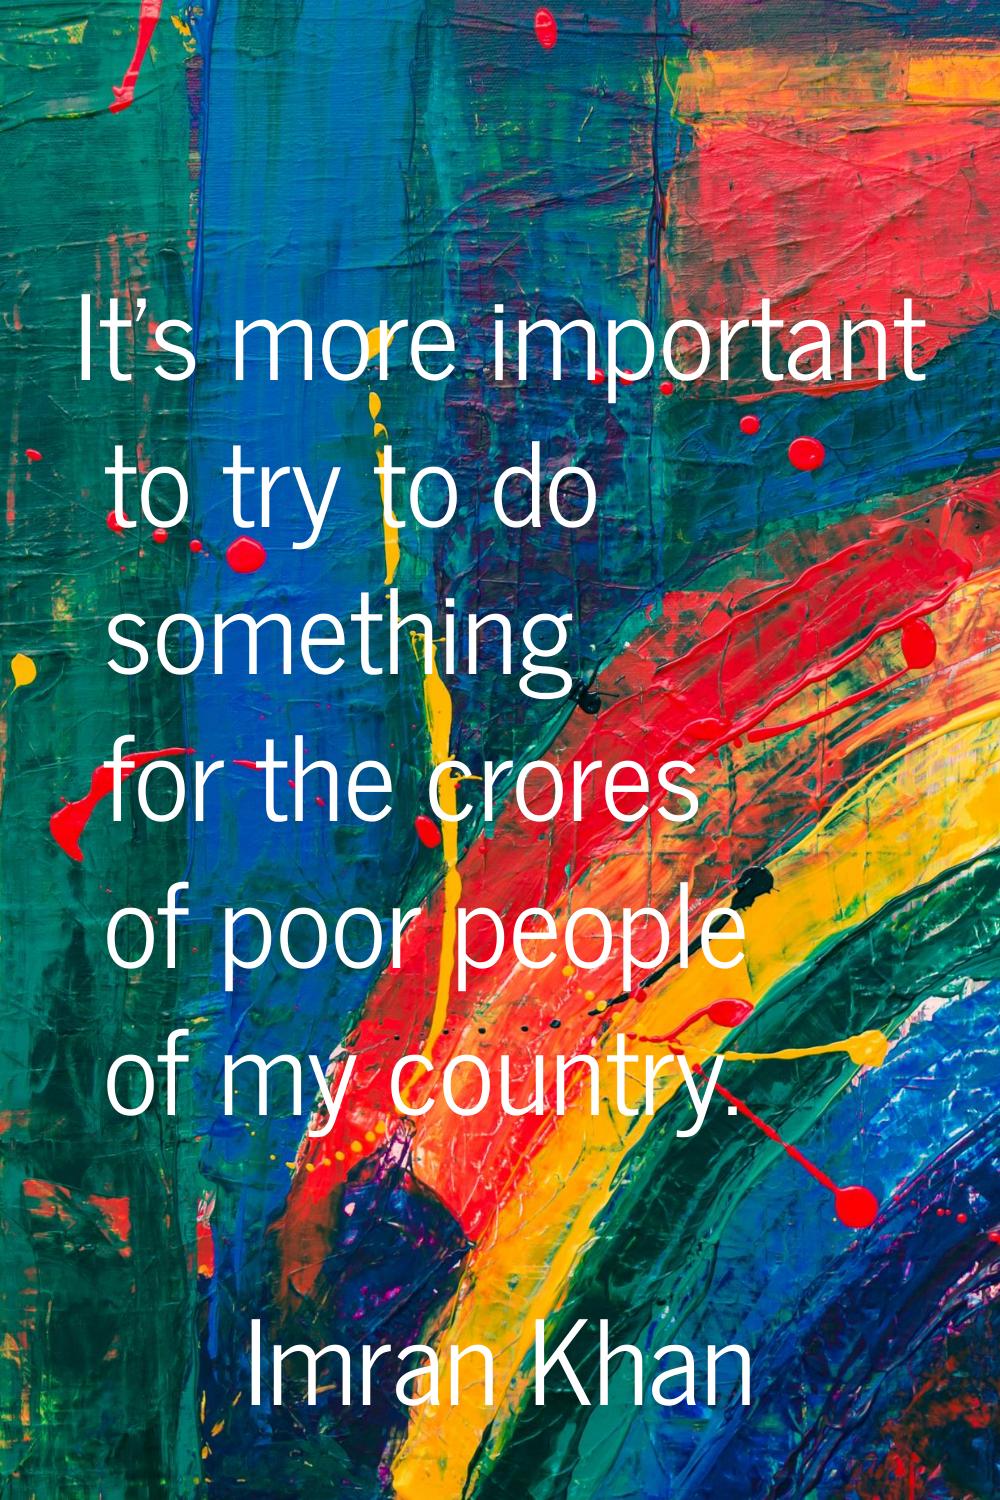 It's more important to try to do something for the crores of poor people of my country.